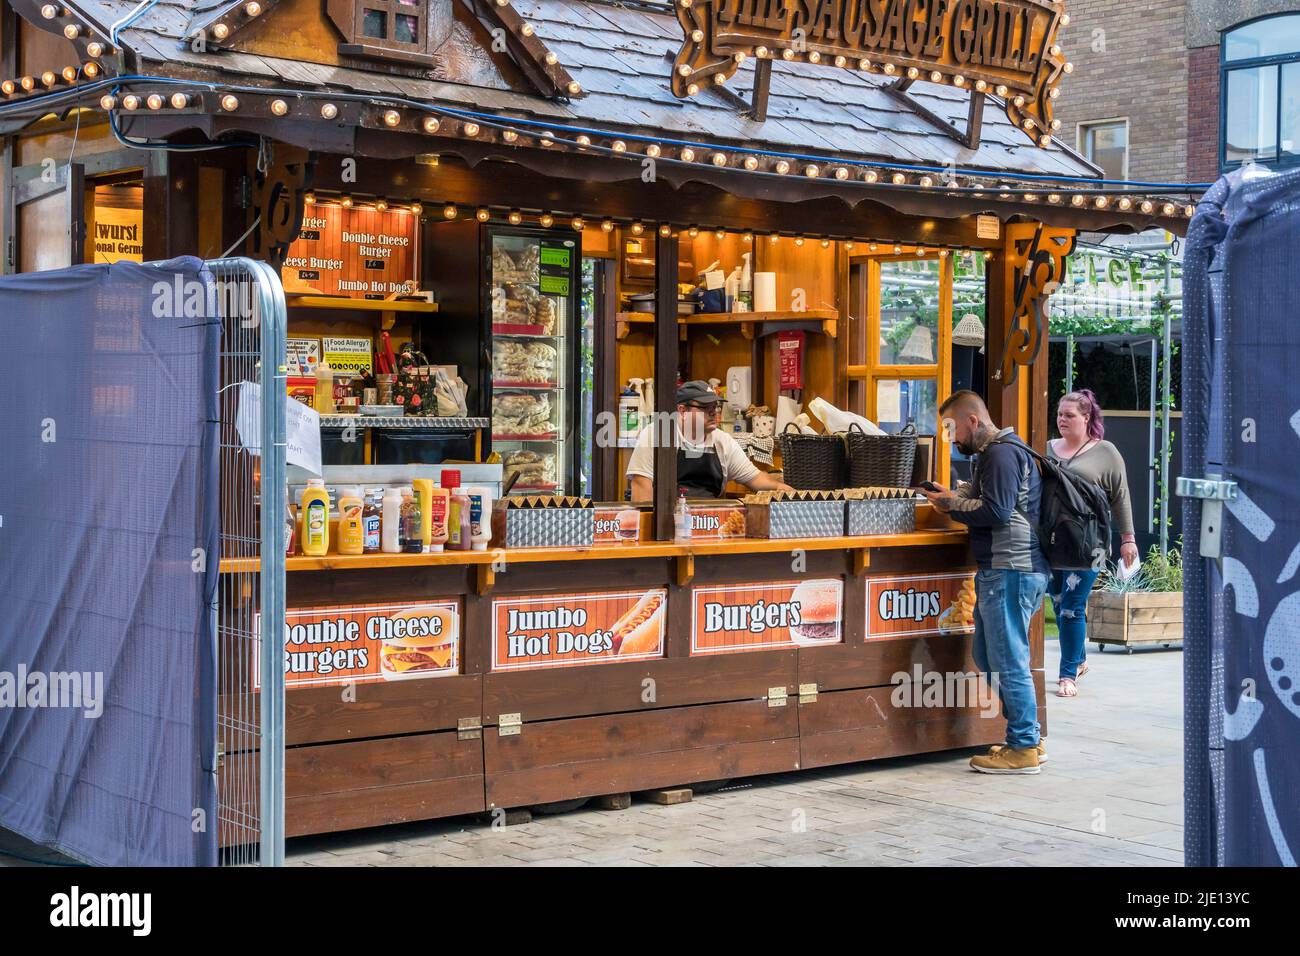 The Sausage Grill Convenience Food Stand Stockfoto